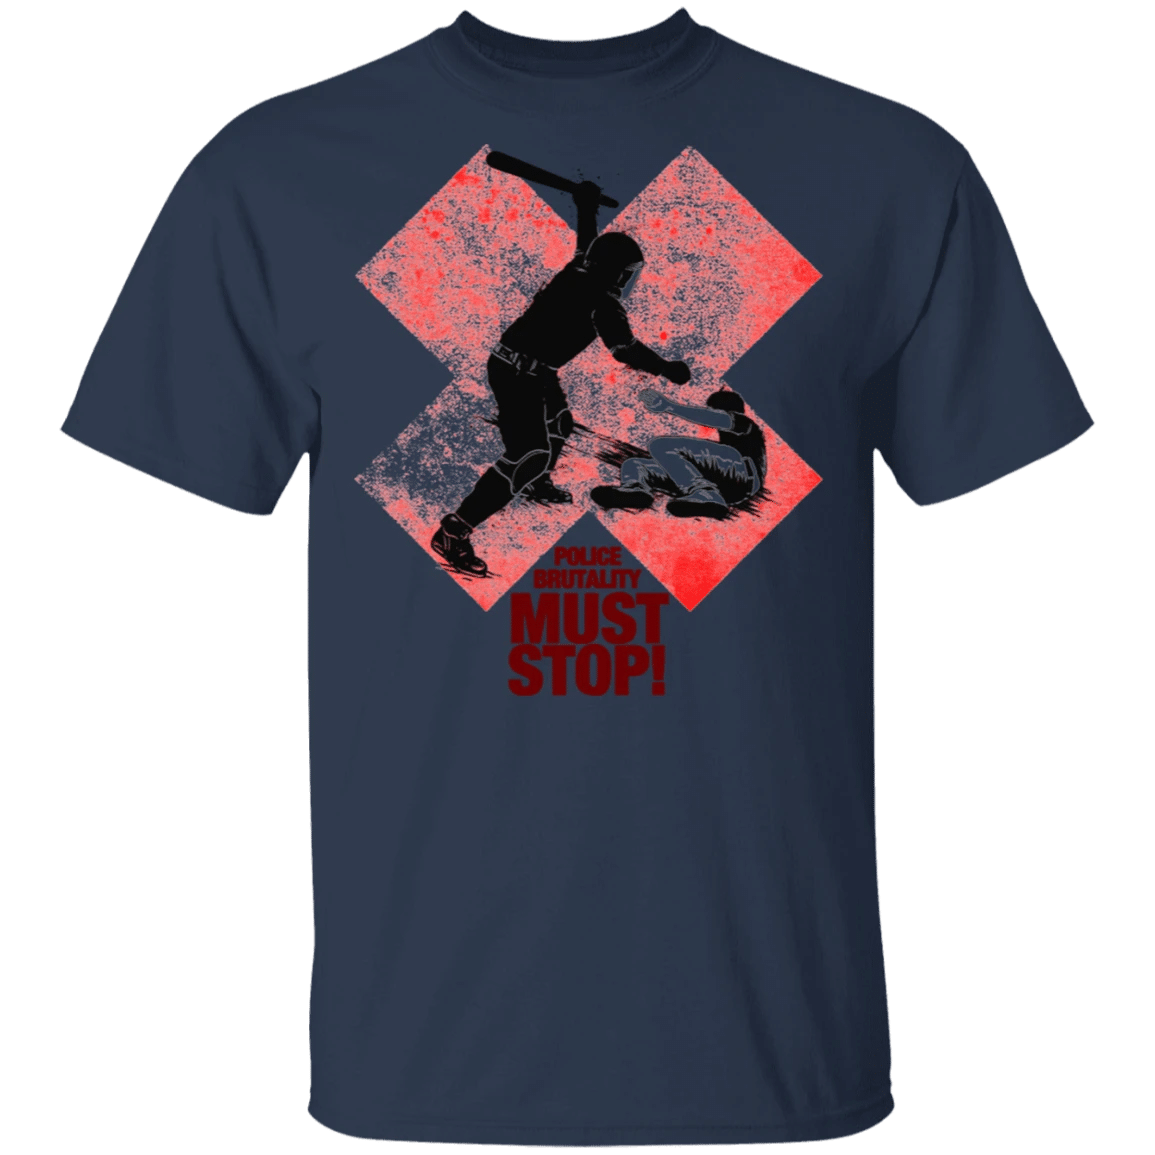 Police Brutality Must Stop Shirt No Justice No Peace Shirt Protest Blm